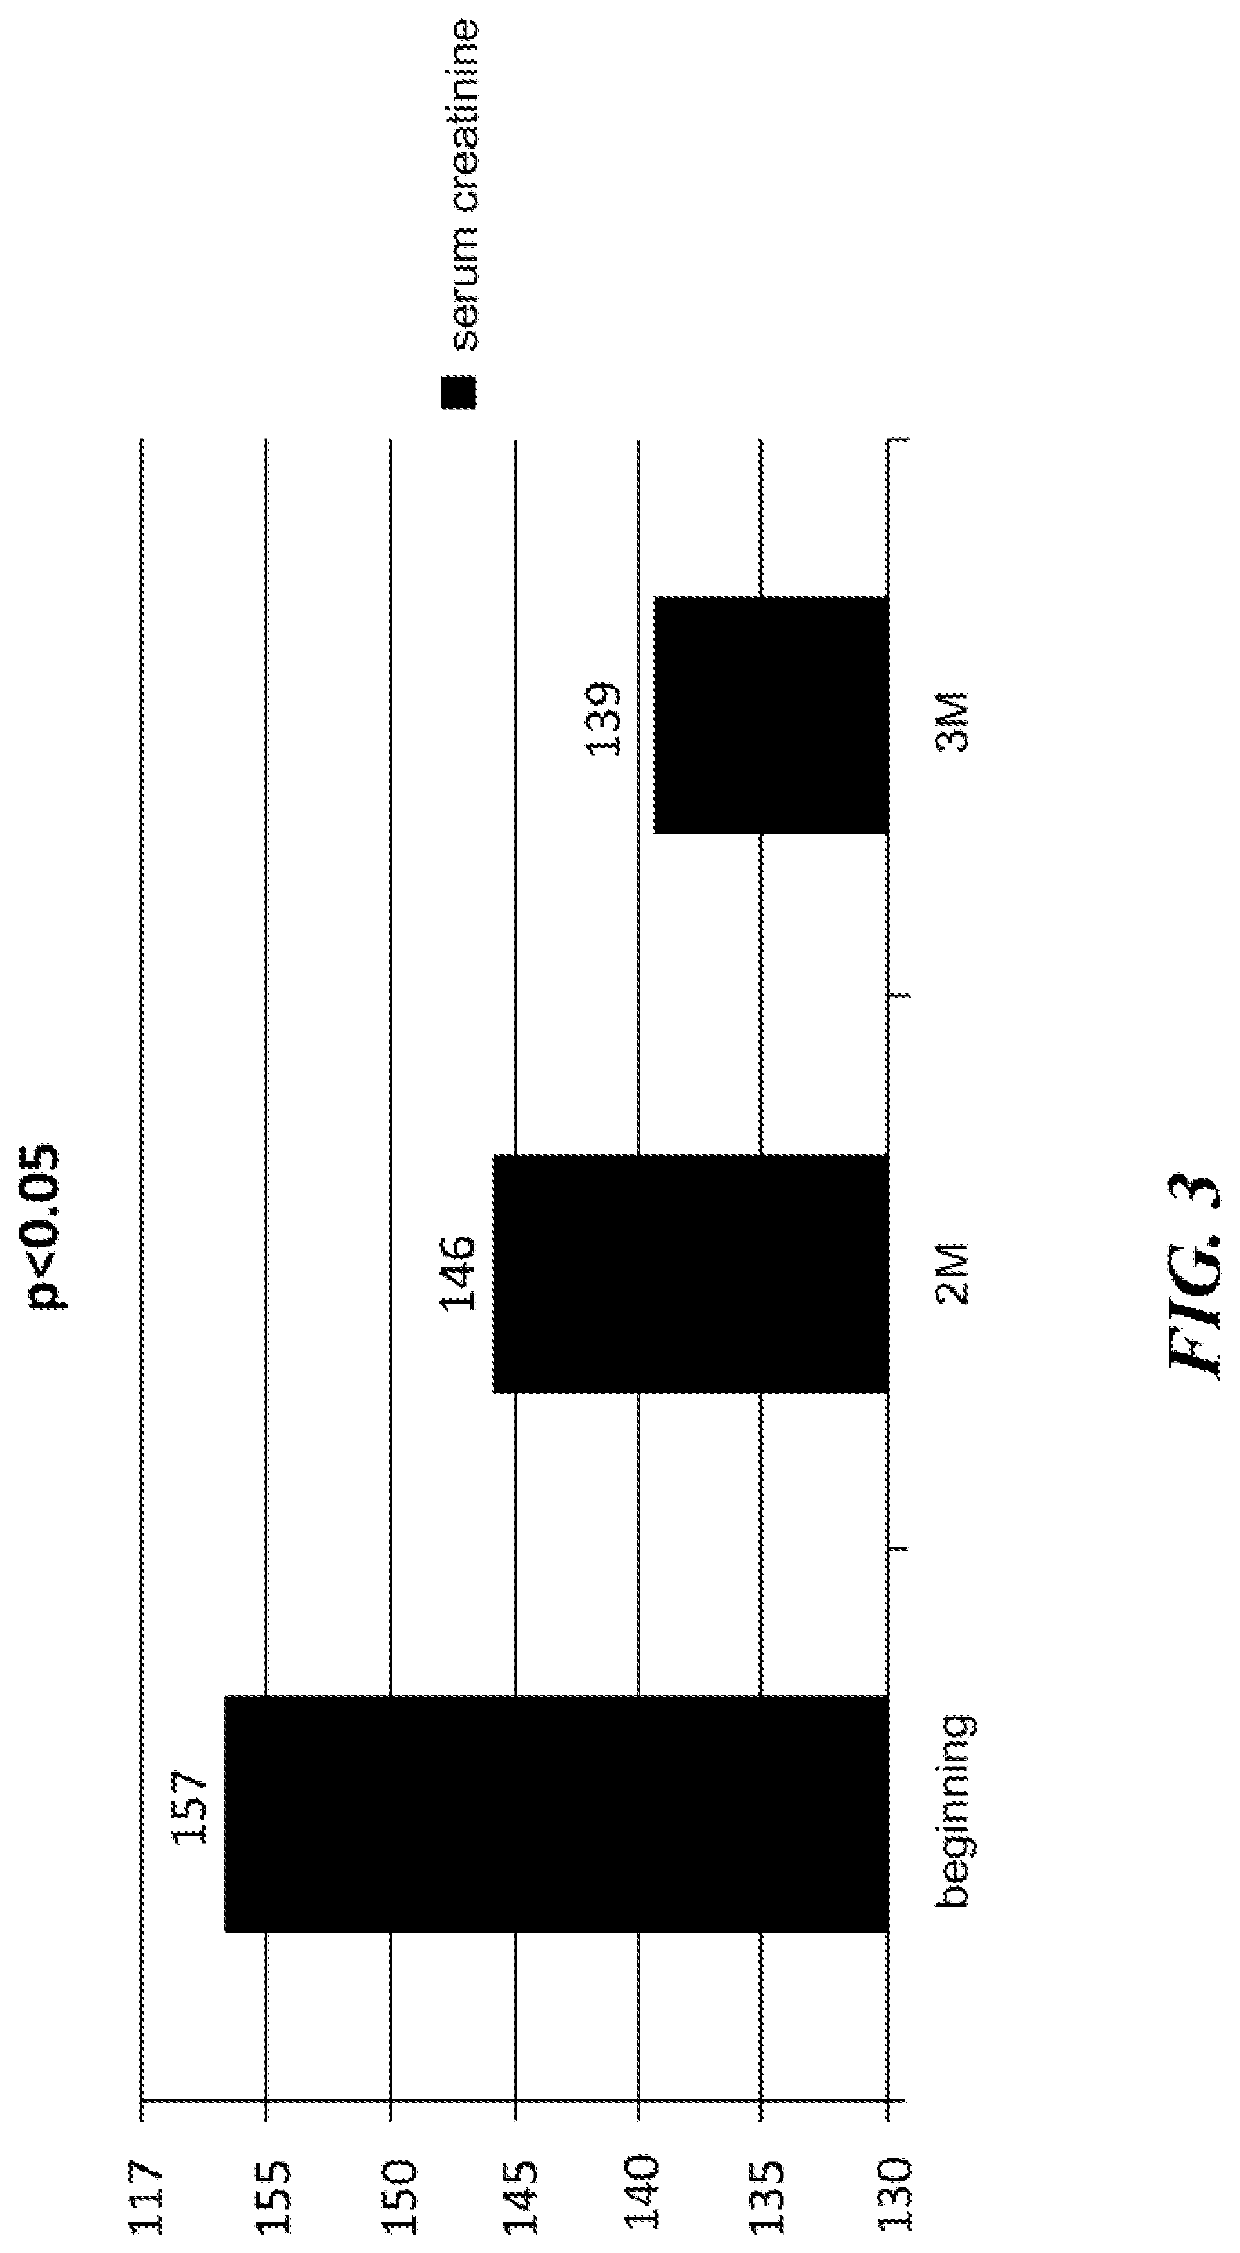 Natural combination products and methods for regulation of kidney and excretory system function